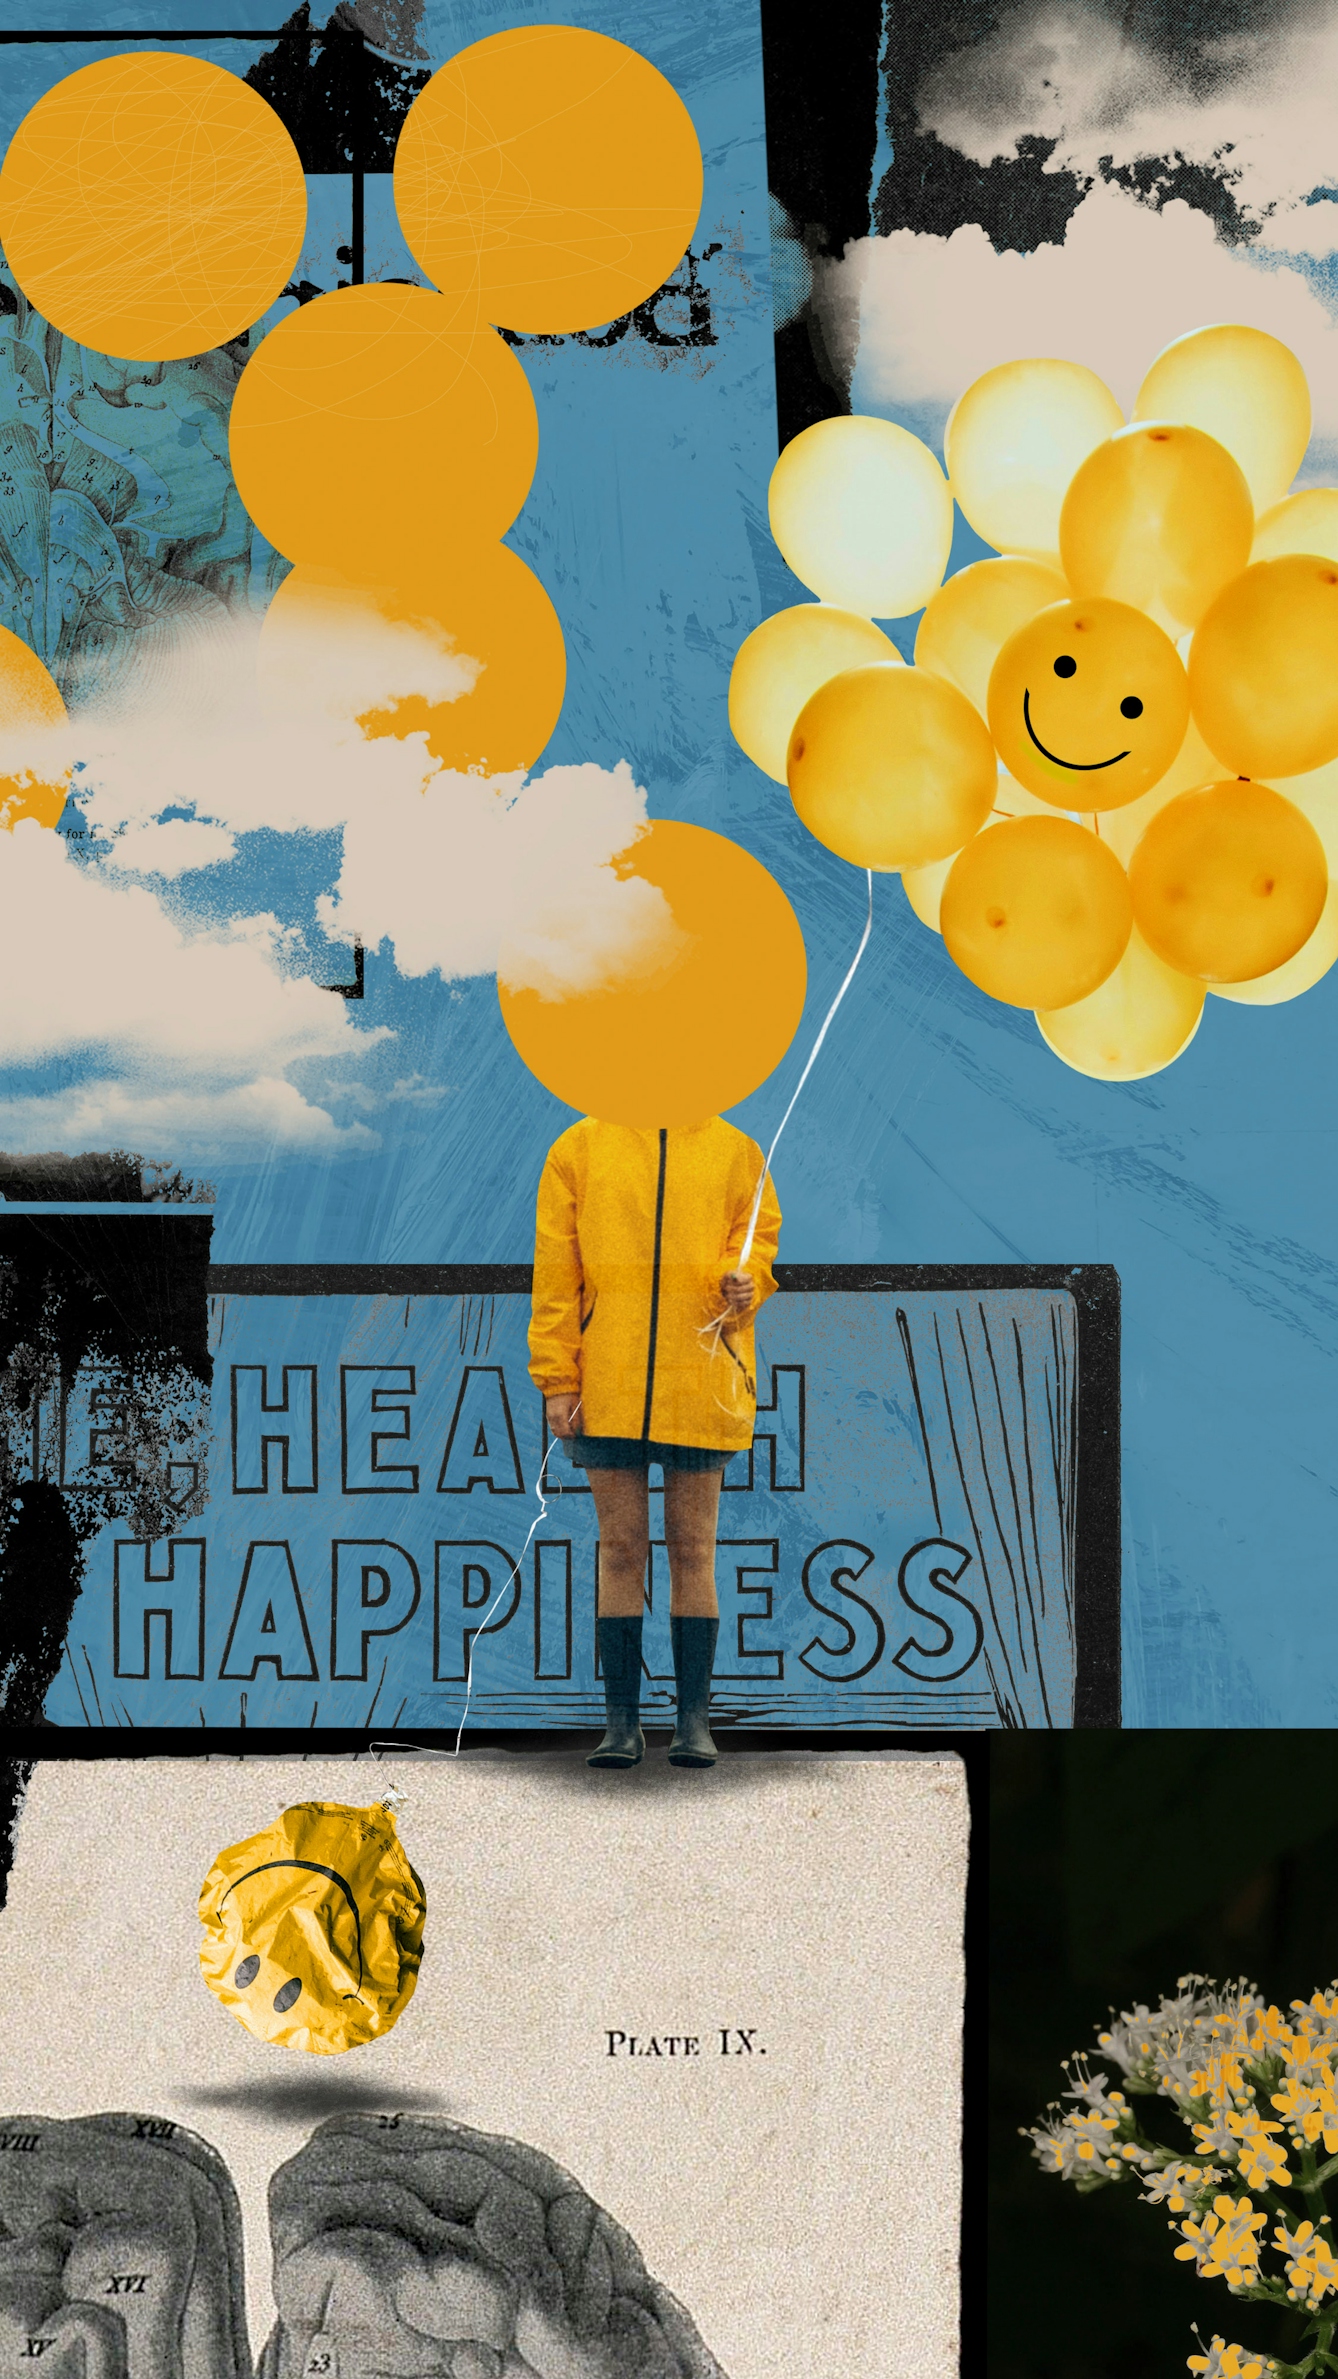 Colourful collage artwork with various elements.

The background is a light blue and the central image is of a person in a yellow raincoat, shorts and black Wellington boots, holding a bunch of yellow balloons in their left hand. One of the balloons has a smiley face on it. In their right hand, they are holding a yellow smiley face balloon which has deflated and is trailing on the ground. There are a number of large yellow circles above them, one of which obscures the person's head. 

Behind the person there is text which reads 'Health, Happiness'. Other elements in the collage include clouds, yellow flowers and an engraving of the human brain. 